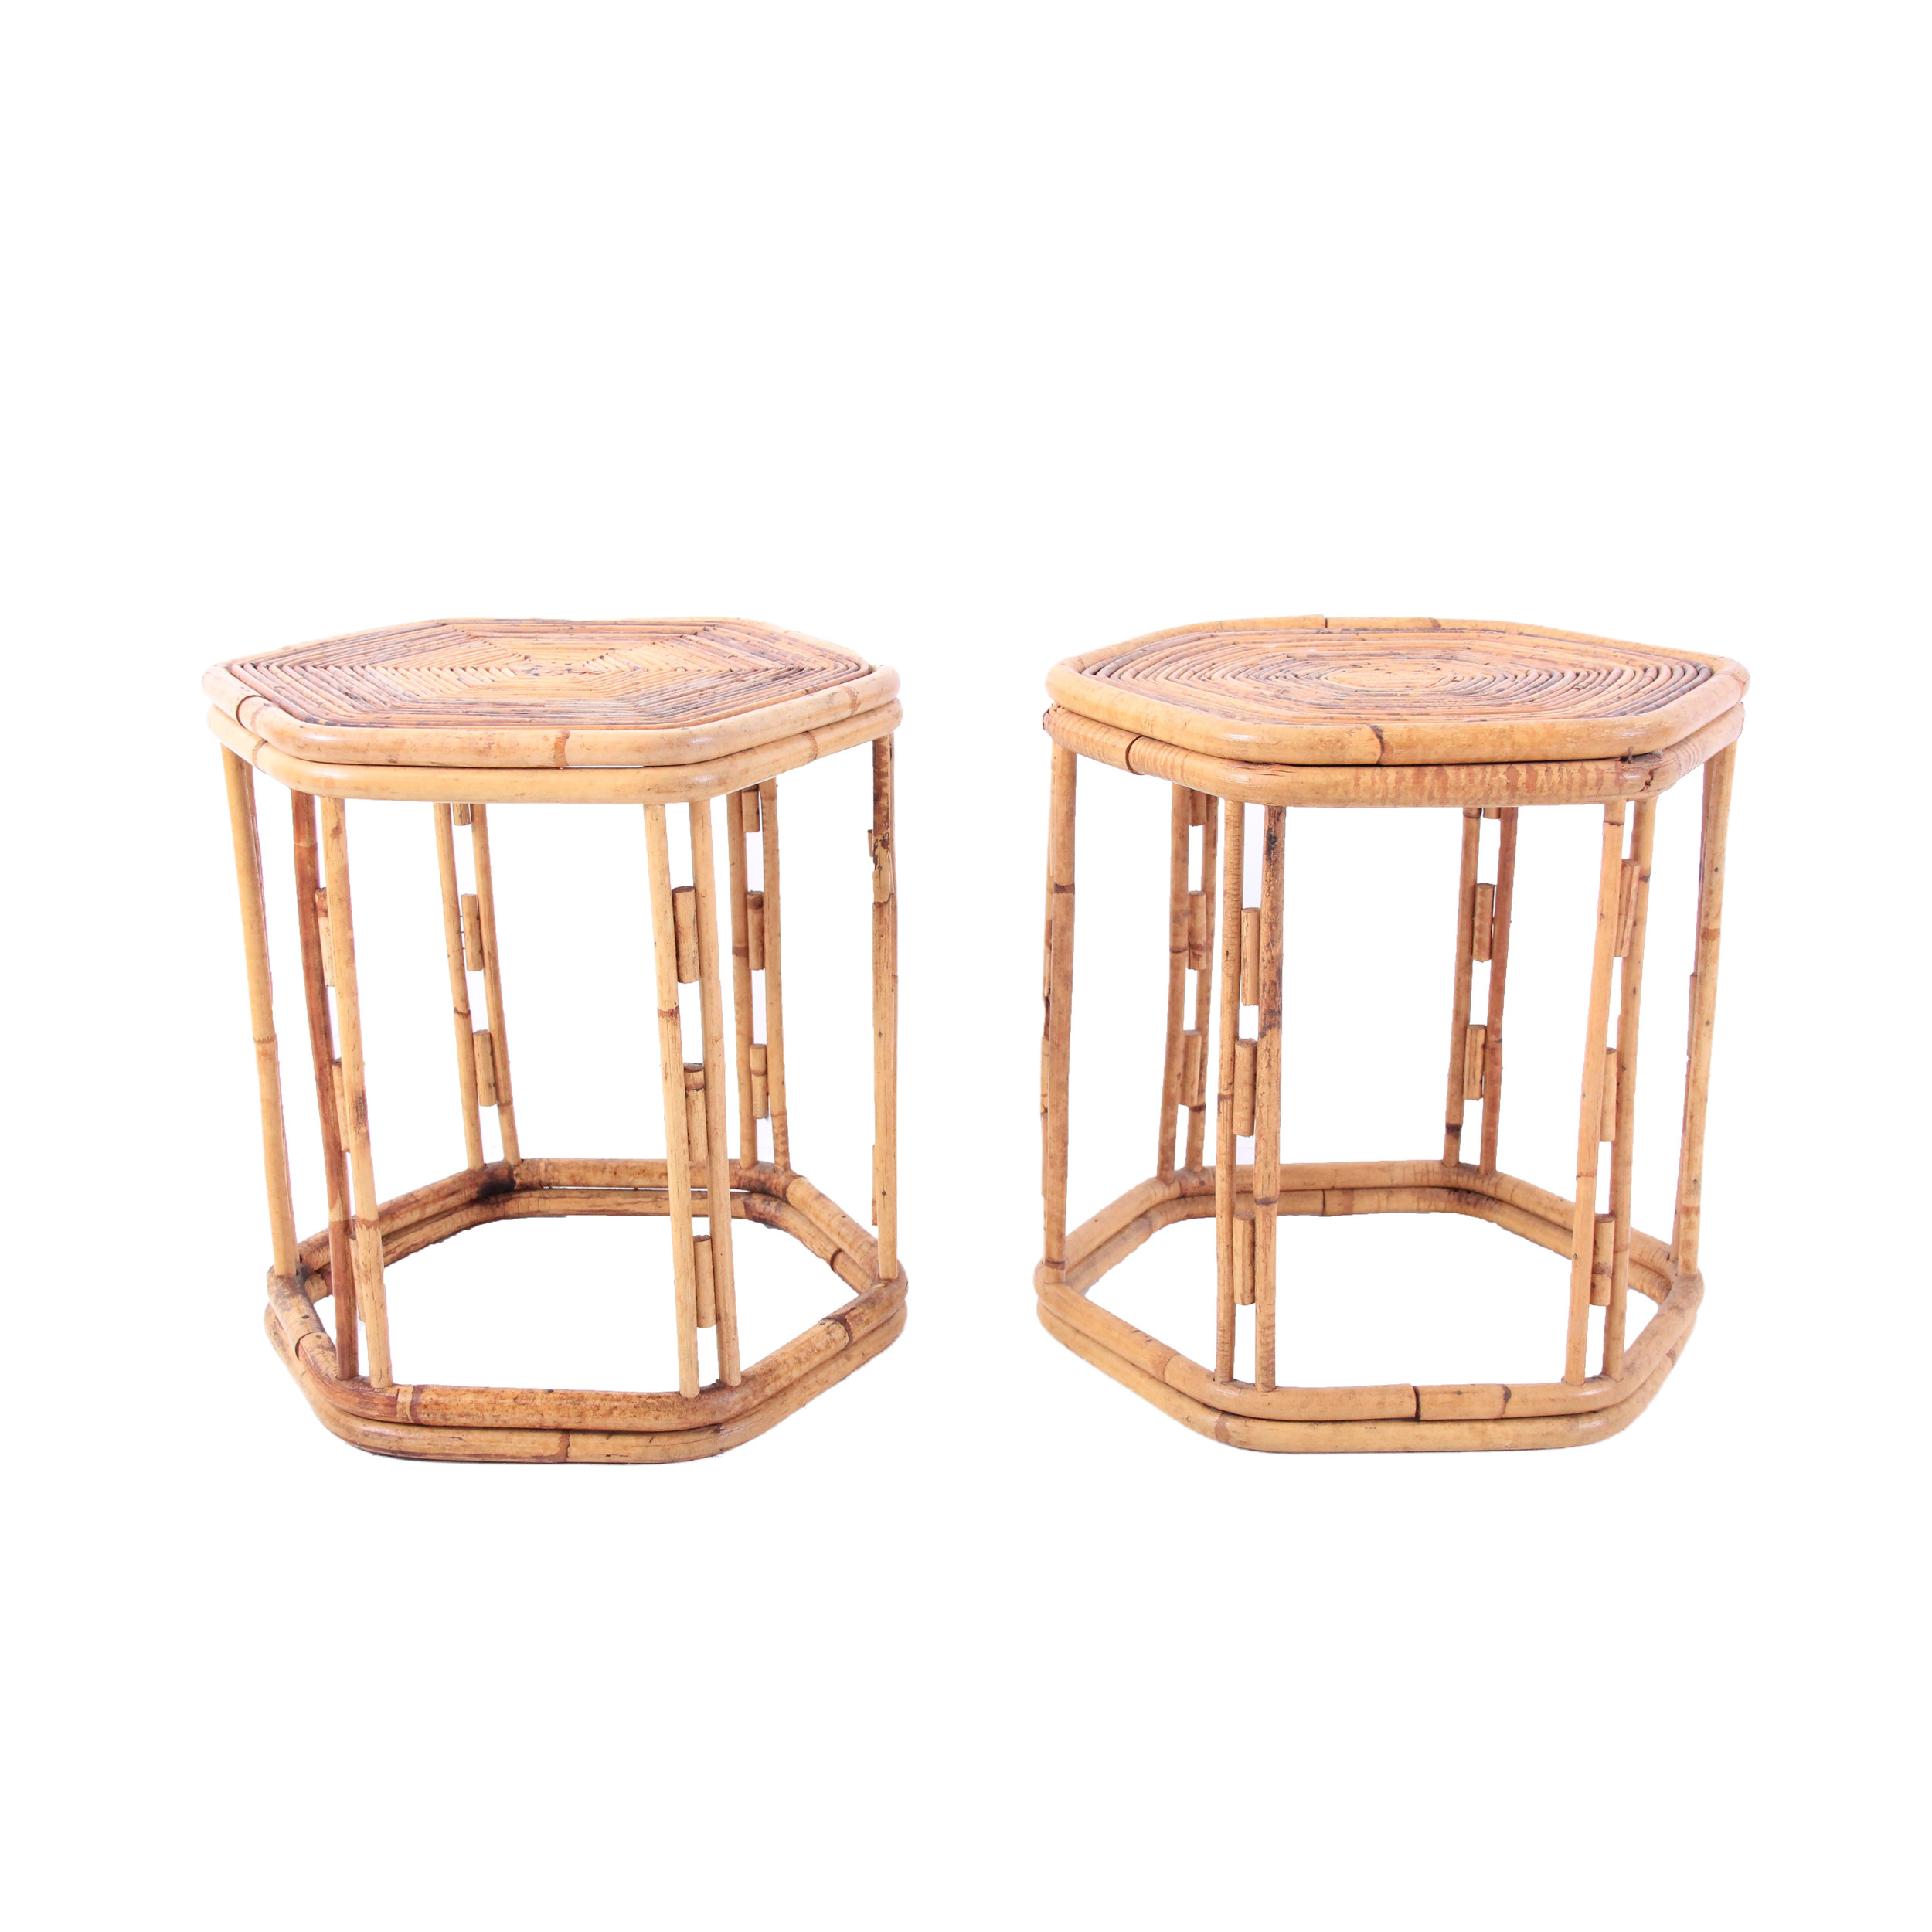 Pair of Vintage Rattan and Bamboo Side Tables